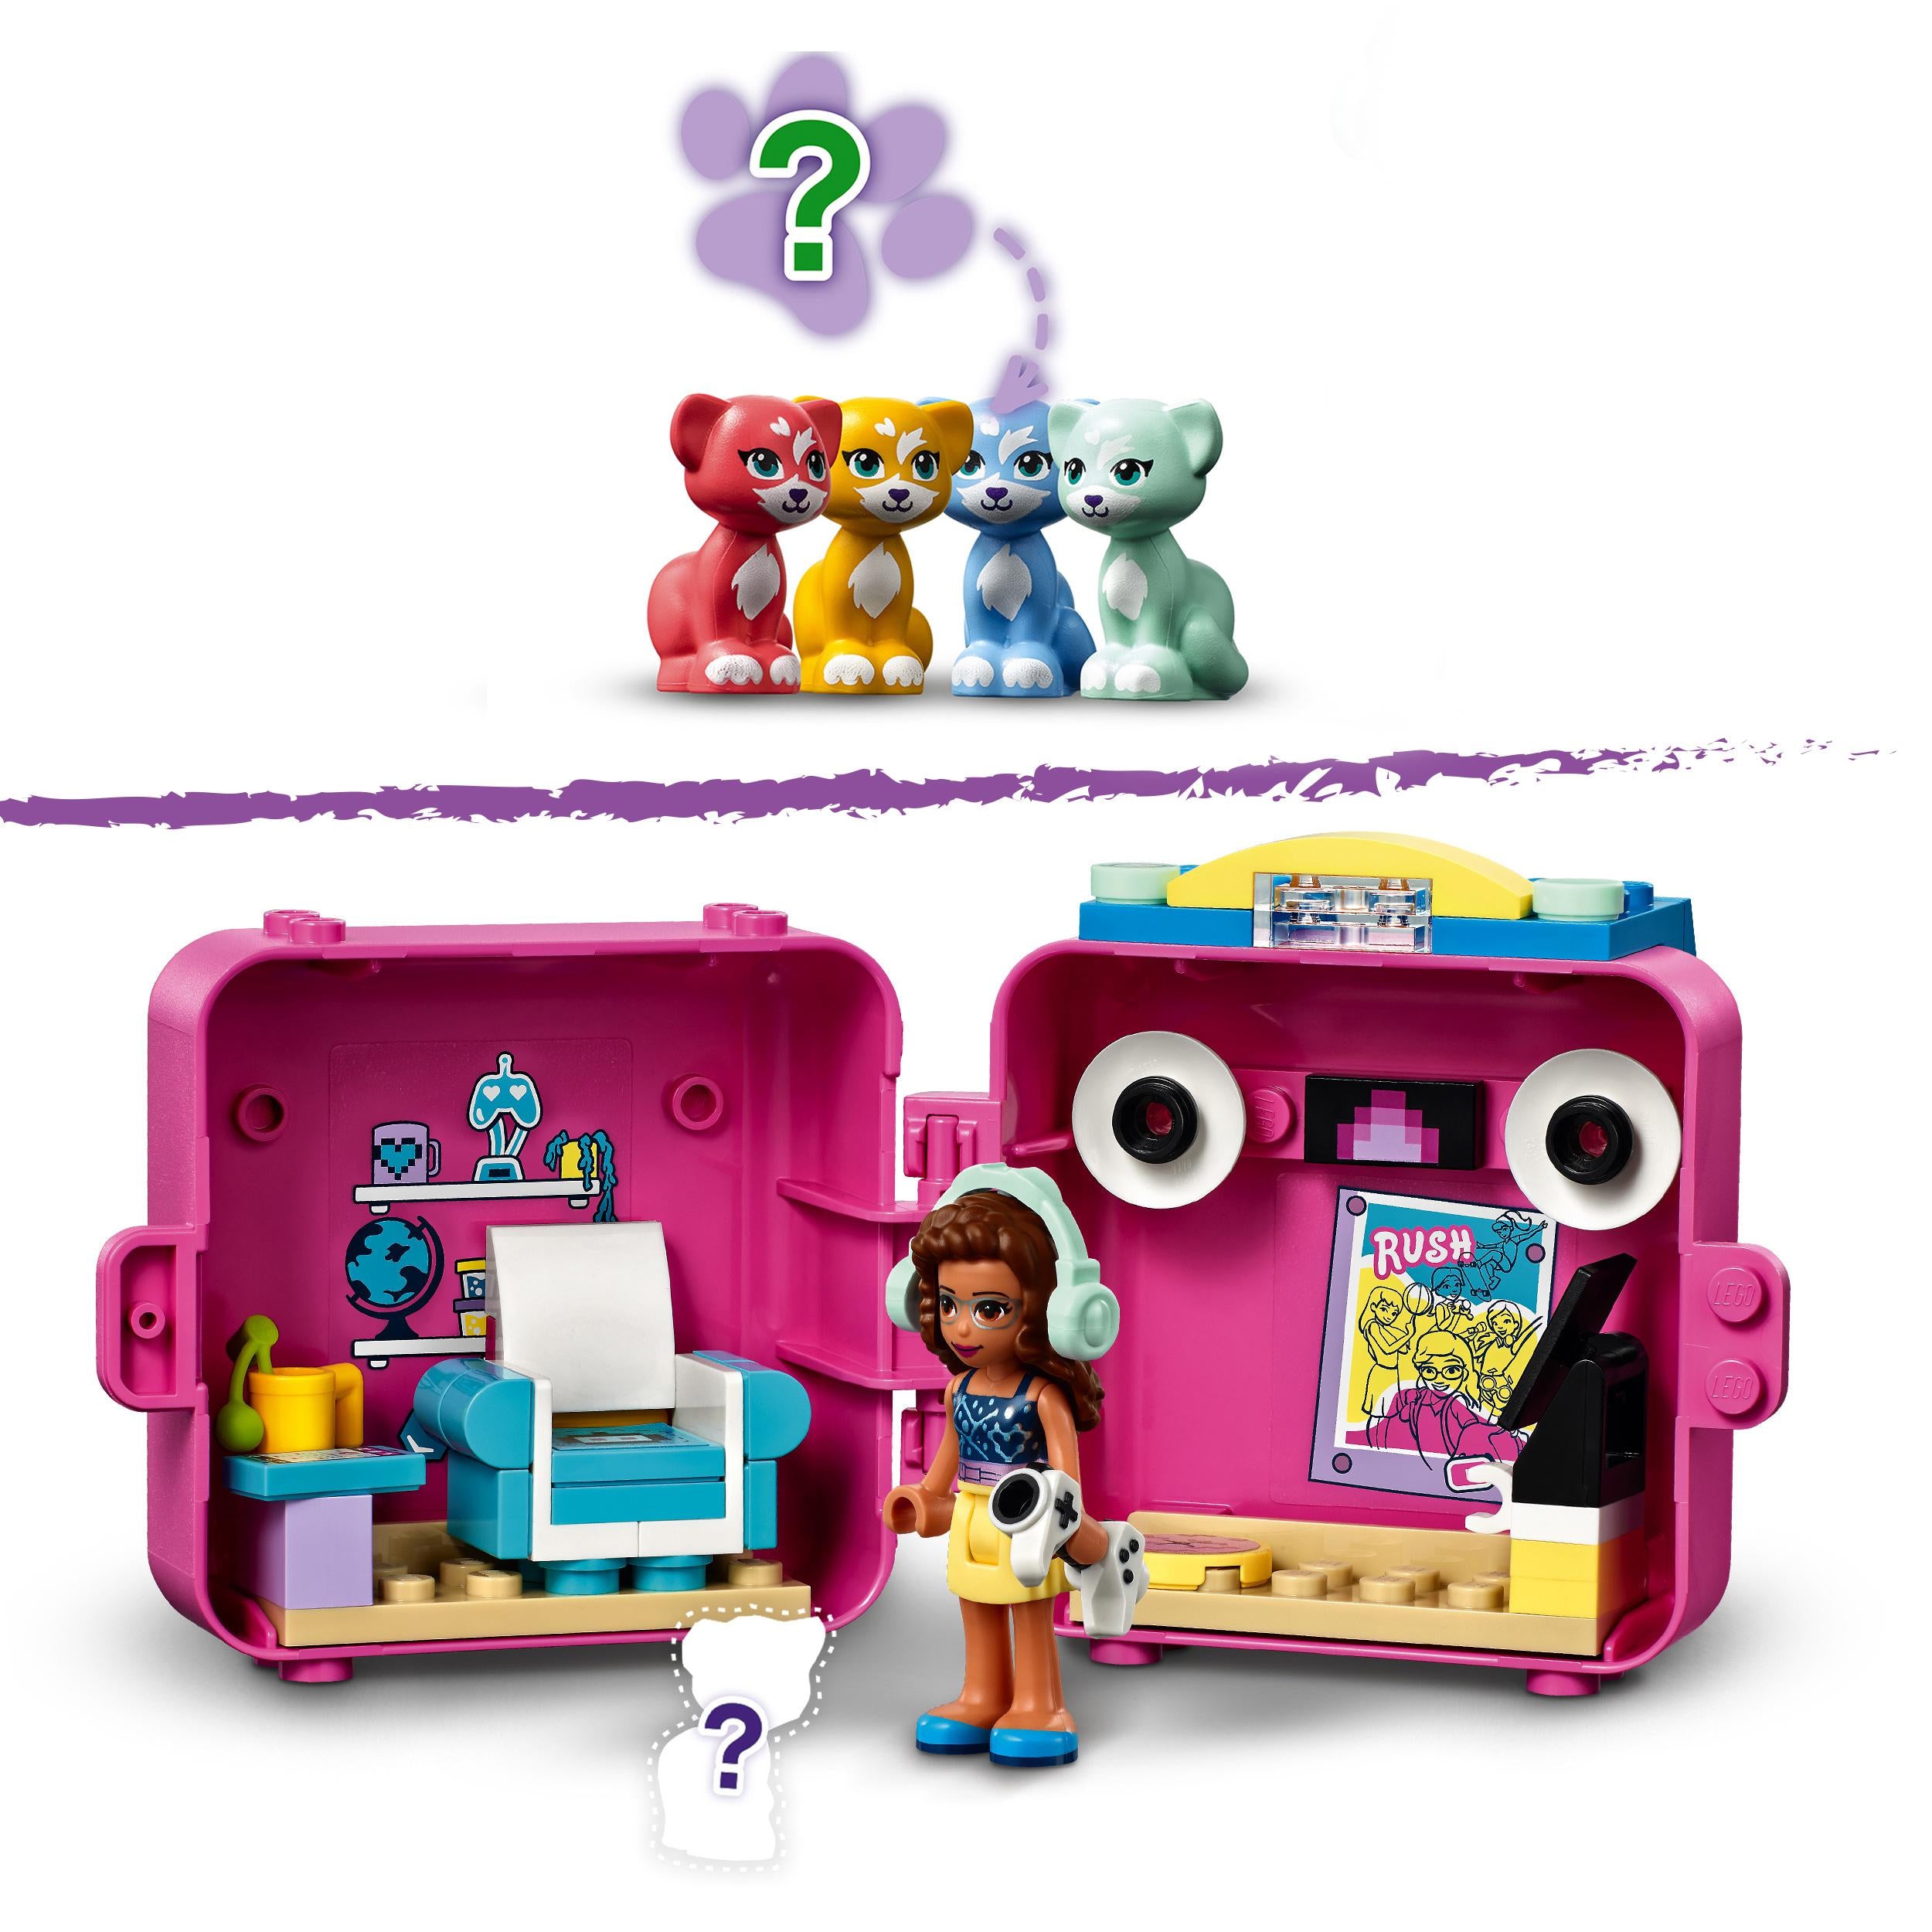 LEGO® Friends Olivia's Gaming Cube Play Set 41667 Default Title